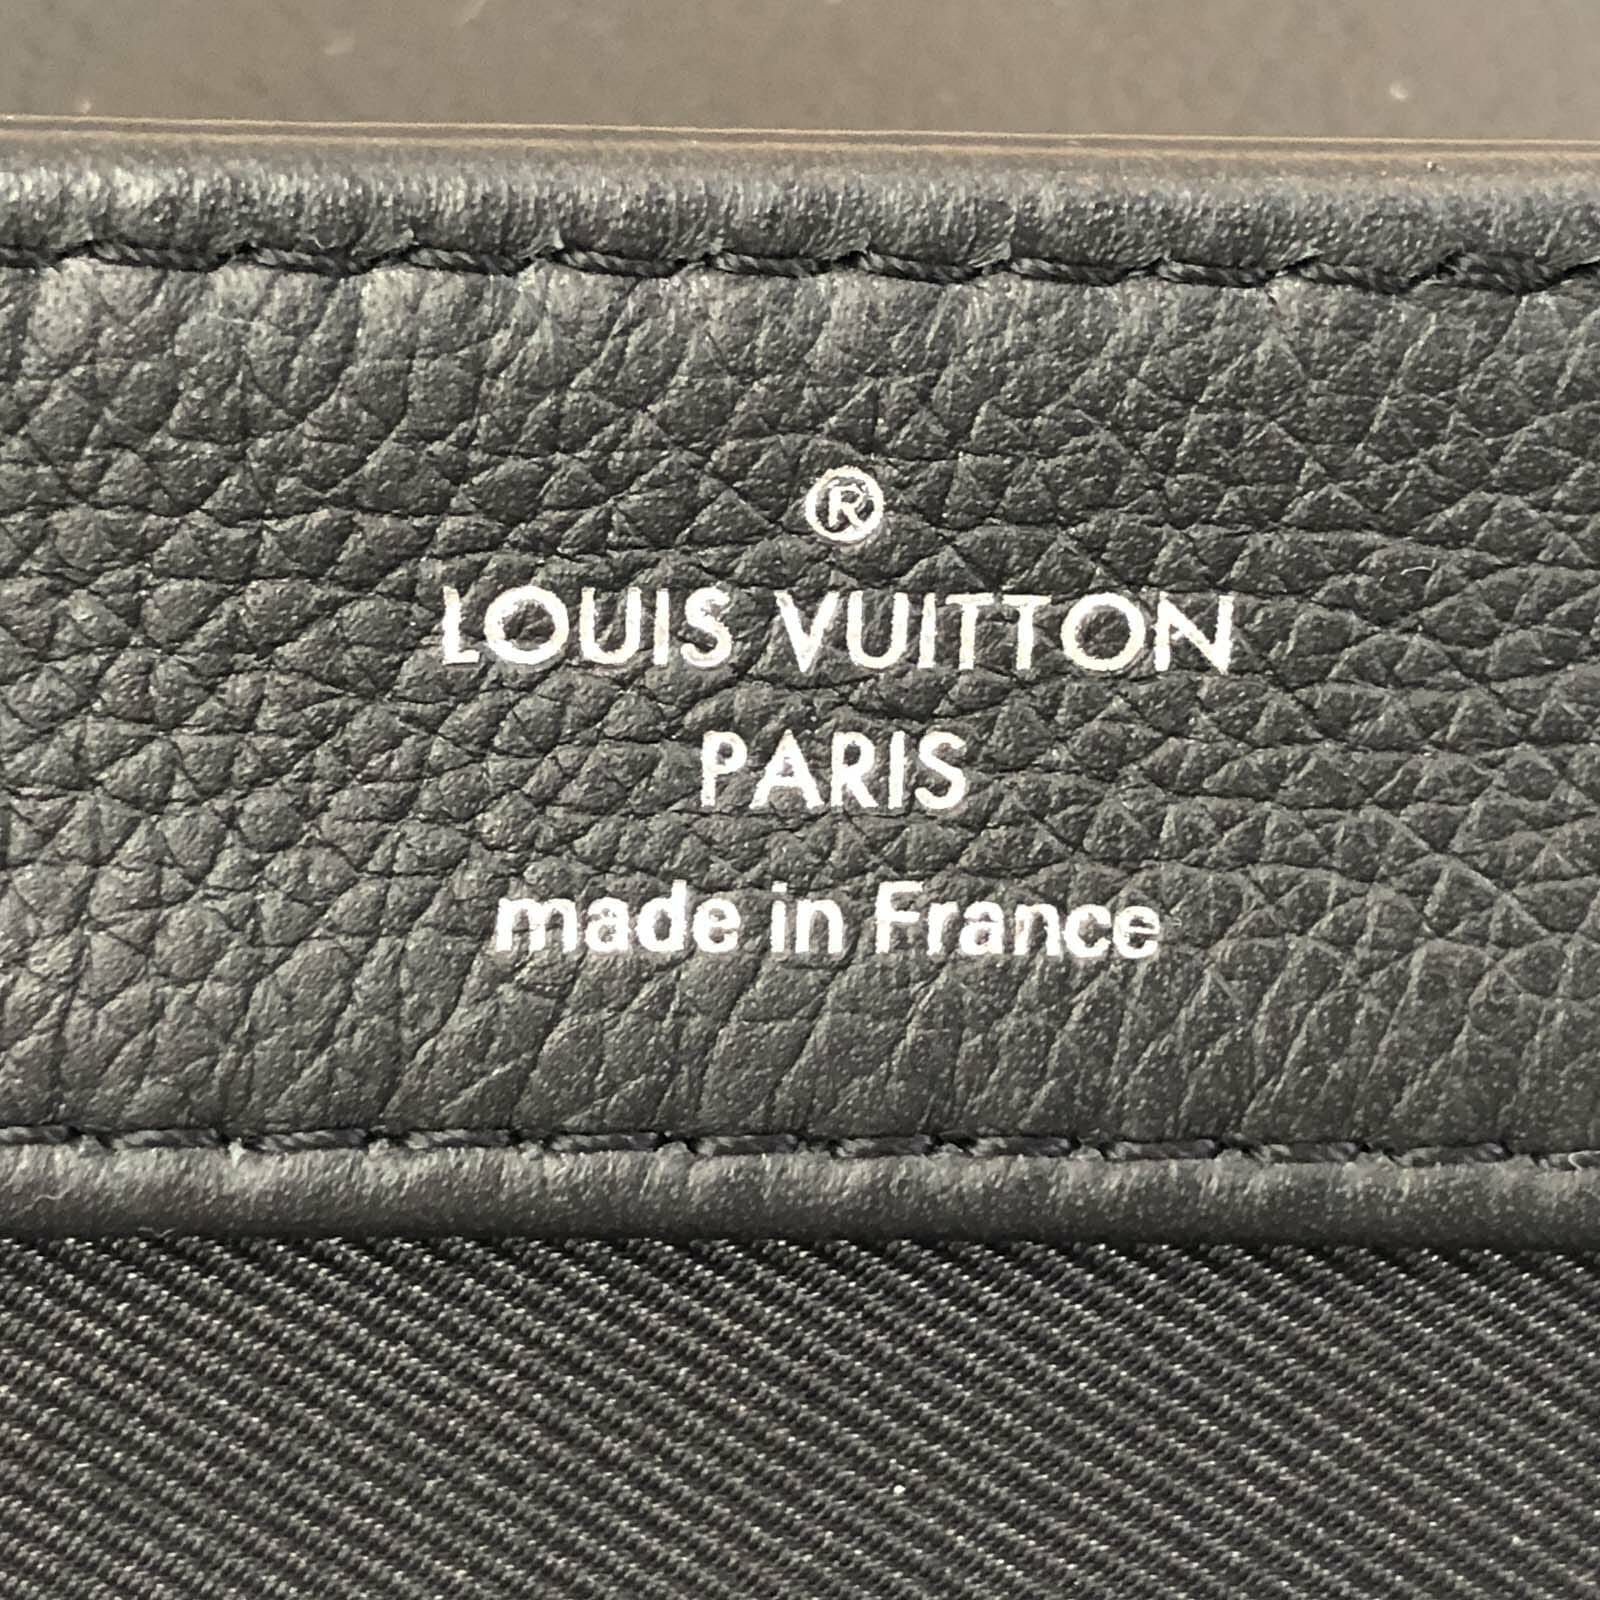 Louis Vuitton Lock Me BB Bag – Black Leather with Silver Hardware ...